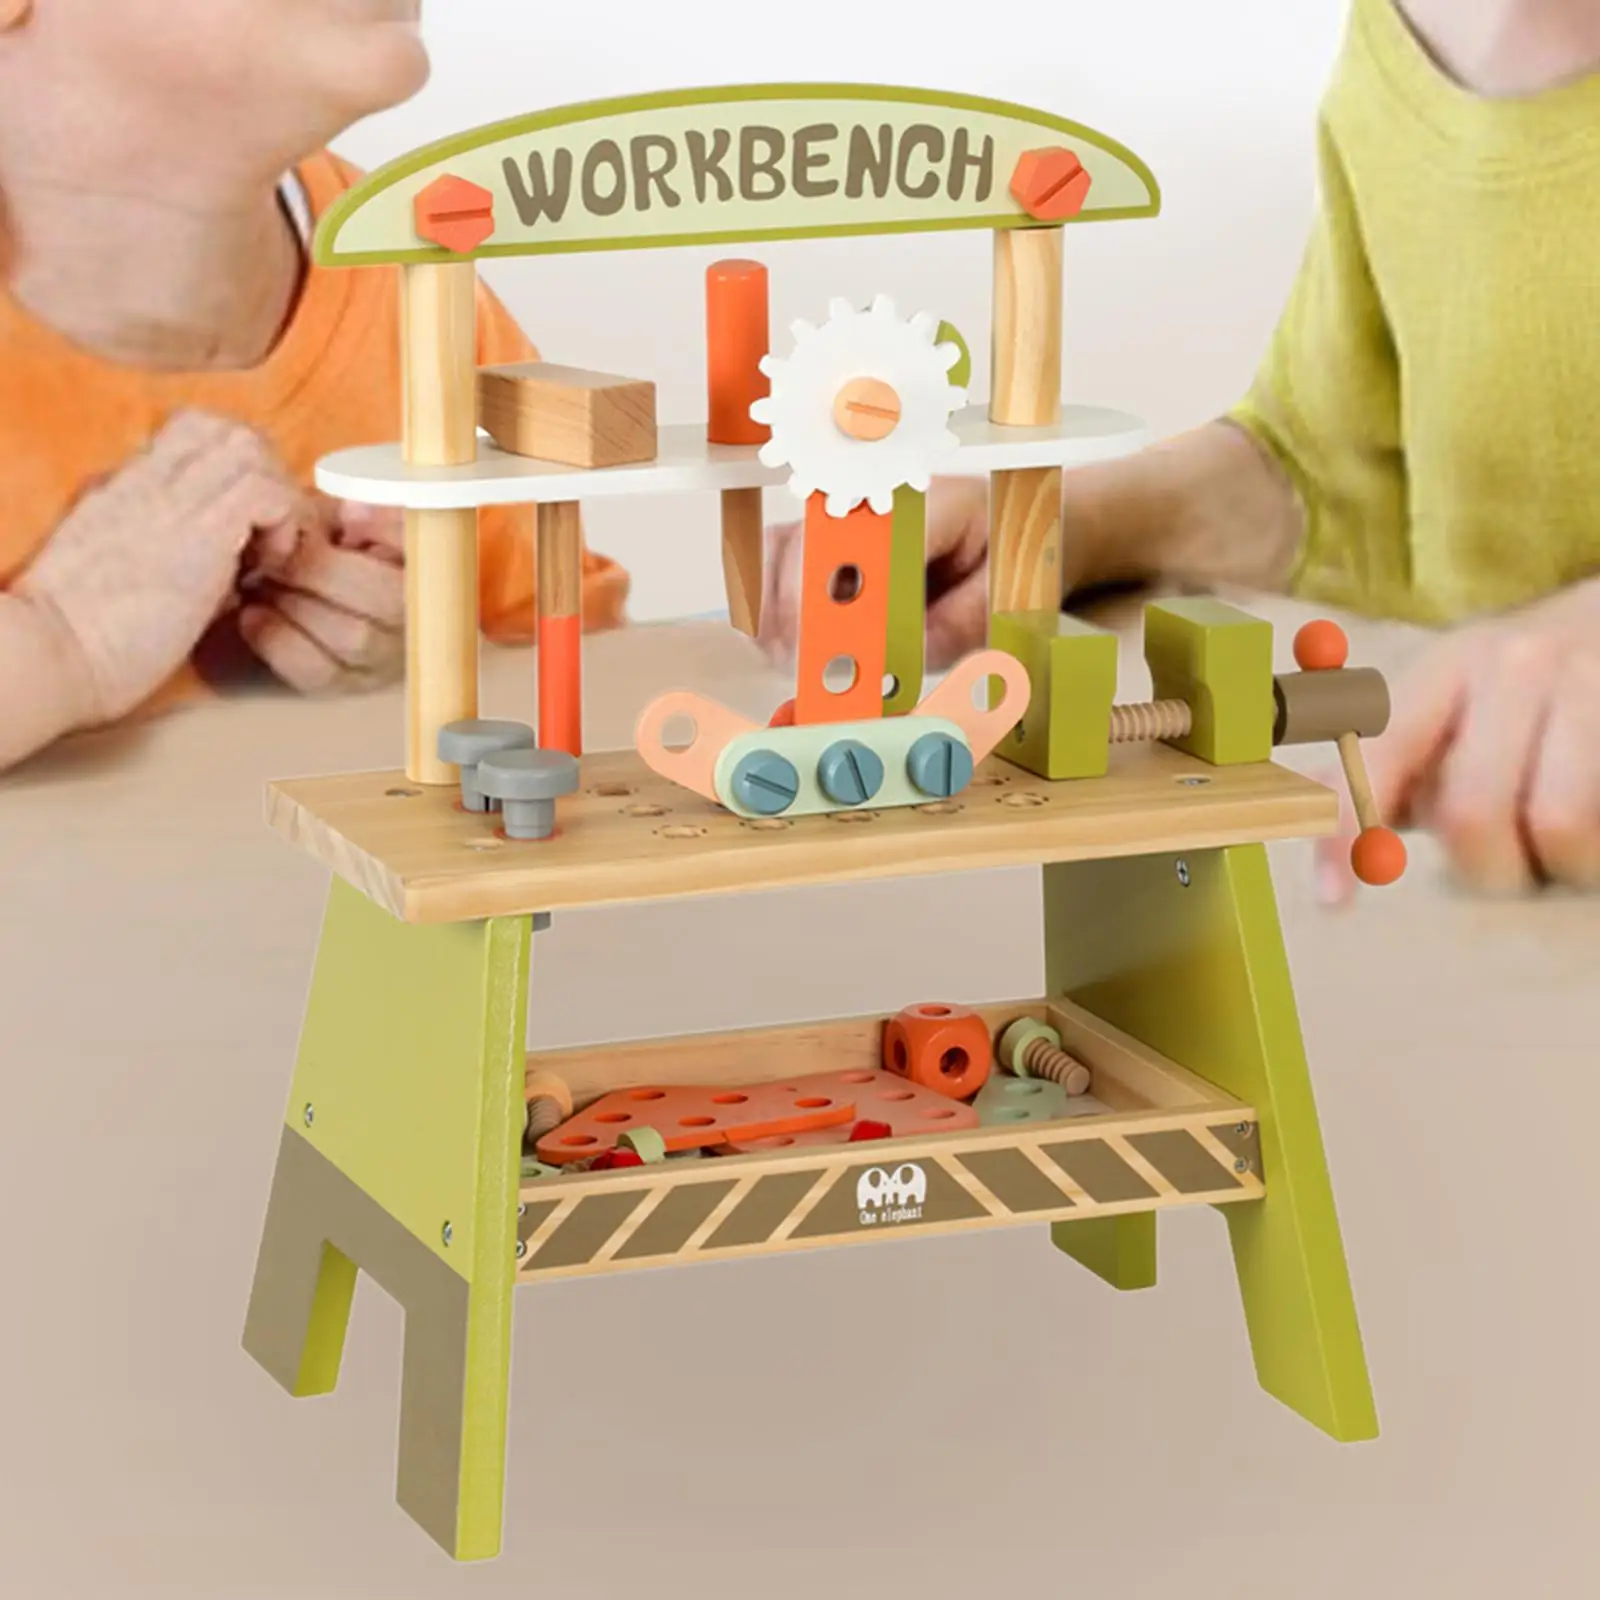 Small Wooden Kid Workbench Toy Montessori Toys DIY Kid`s Wooden Tool Bench Toy for Girls Boys 3 4 5 Years Old Holiday Present